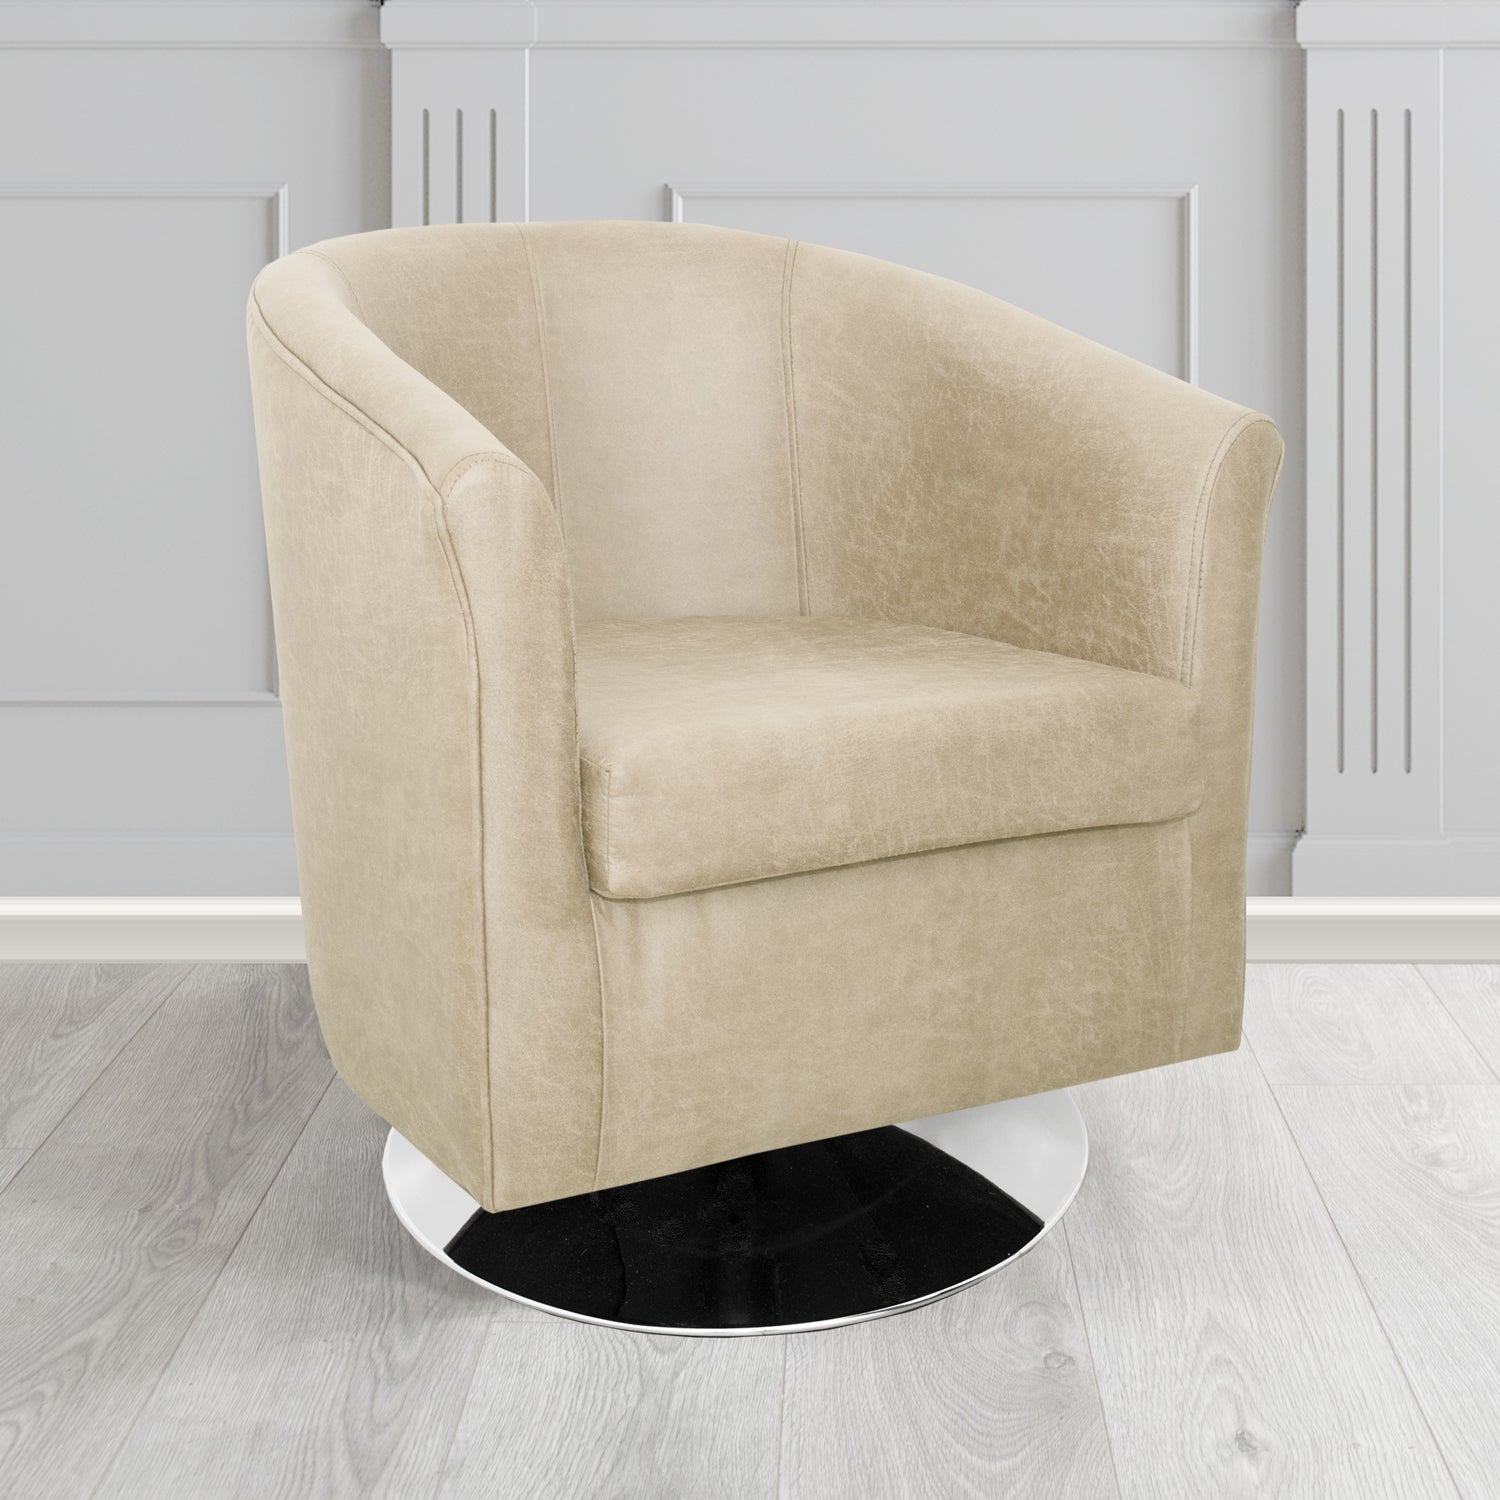 Tuscany Swivel Tub Chair in Nevada Beige Faux Leather - The Tub Chair Shop